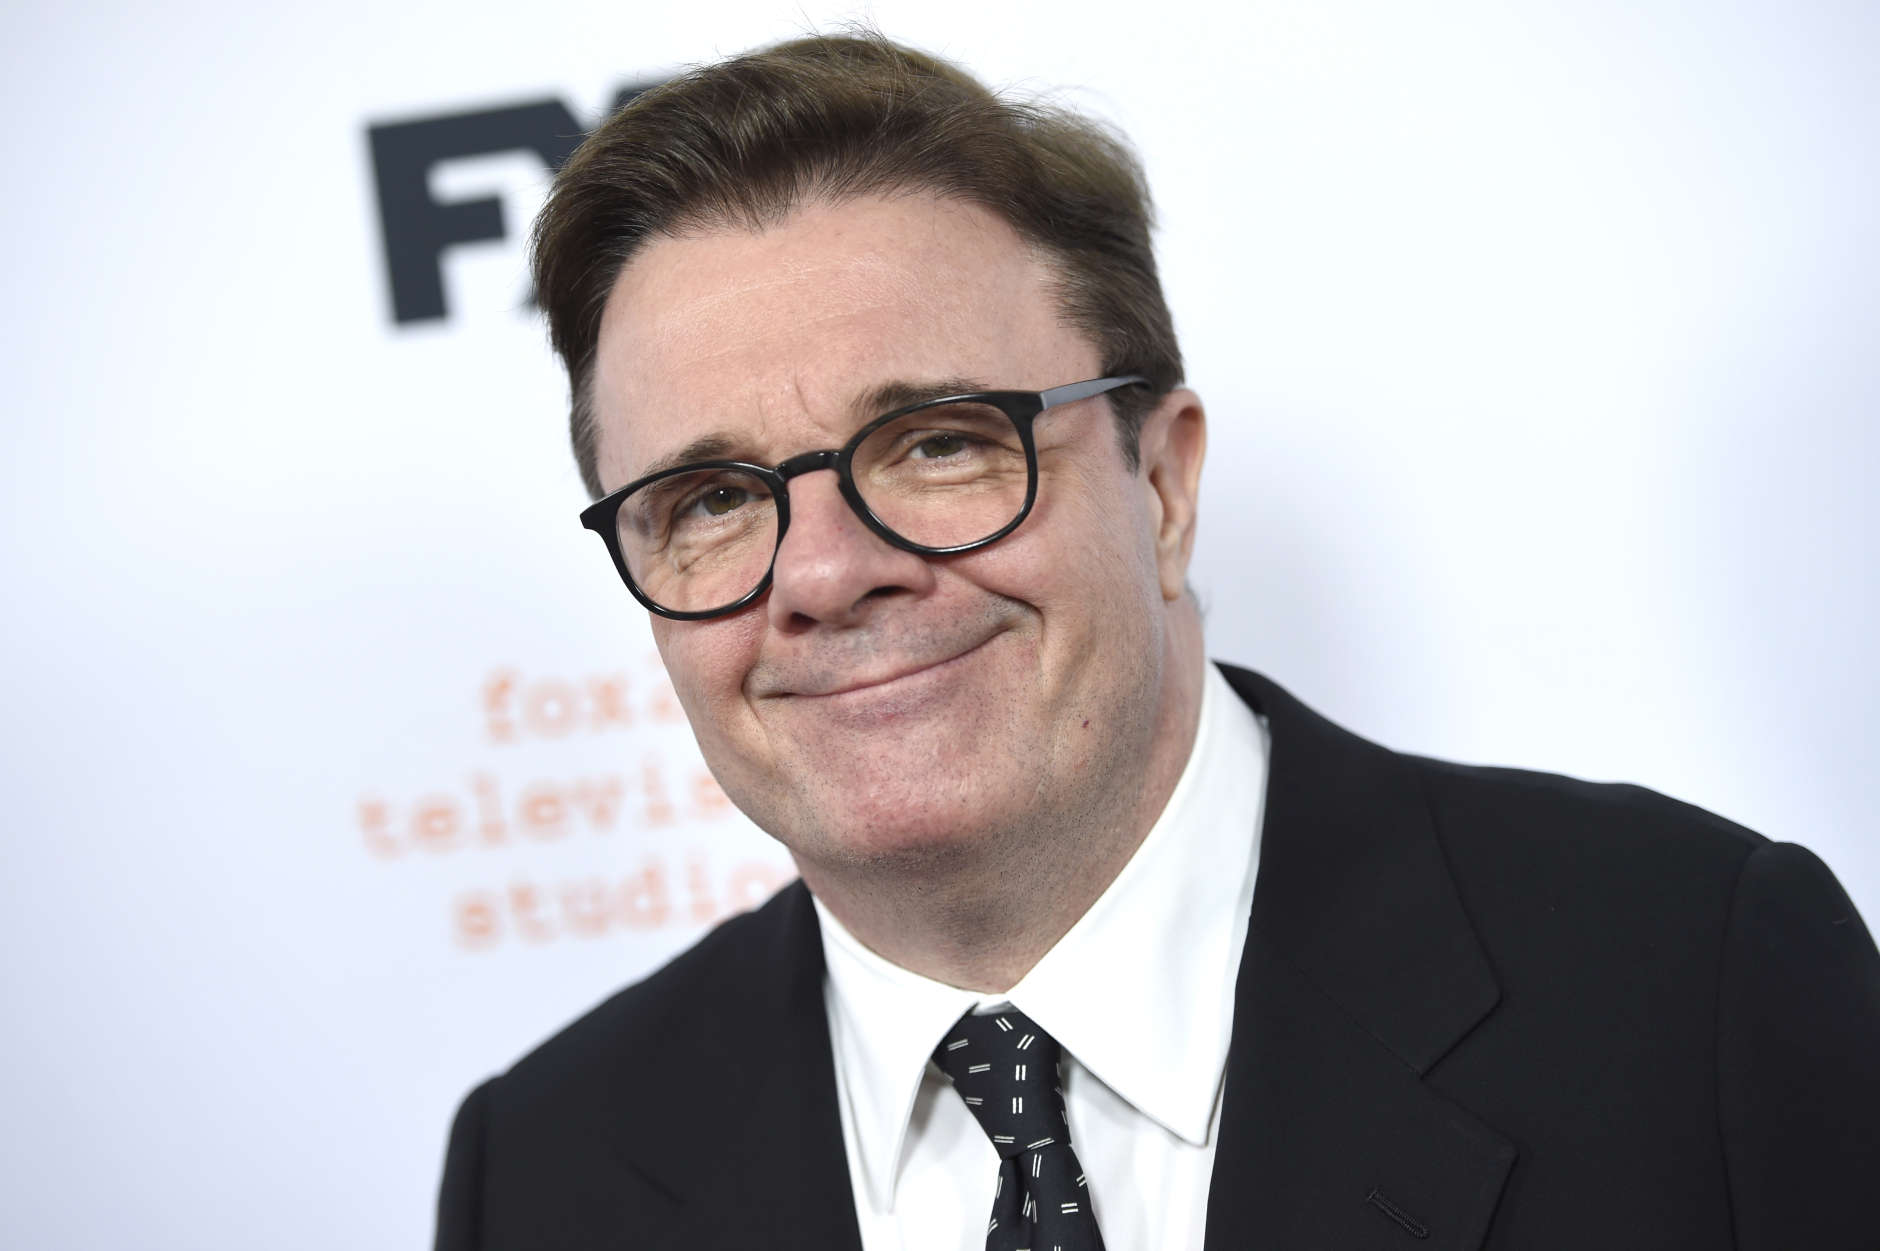 Nathan Lane arrives at the "American Crime Story: The People v. O.J. Simpson" For Your Consideration event at The Theatre at Ace Hotel on Monday, April 4, 2016, in Los Angeles. (Photo by Chris Pizzello/Invision/AP)